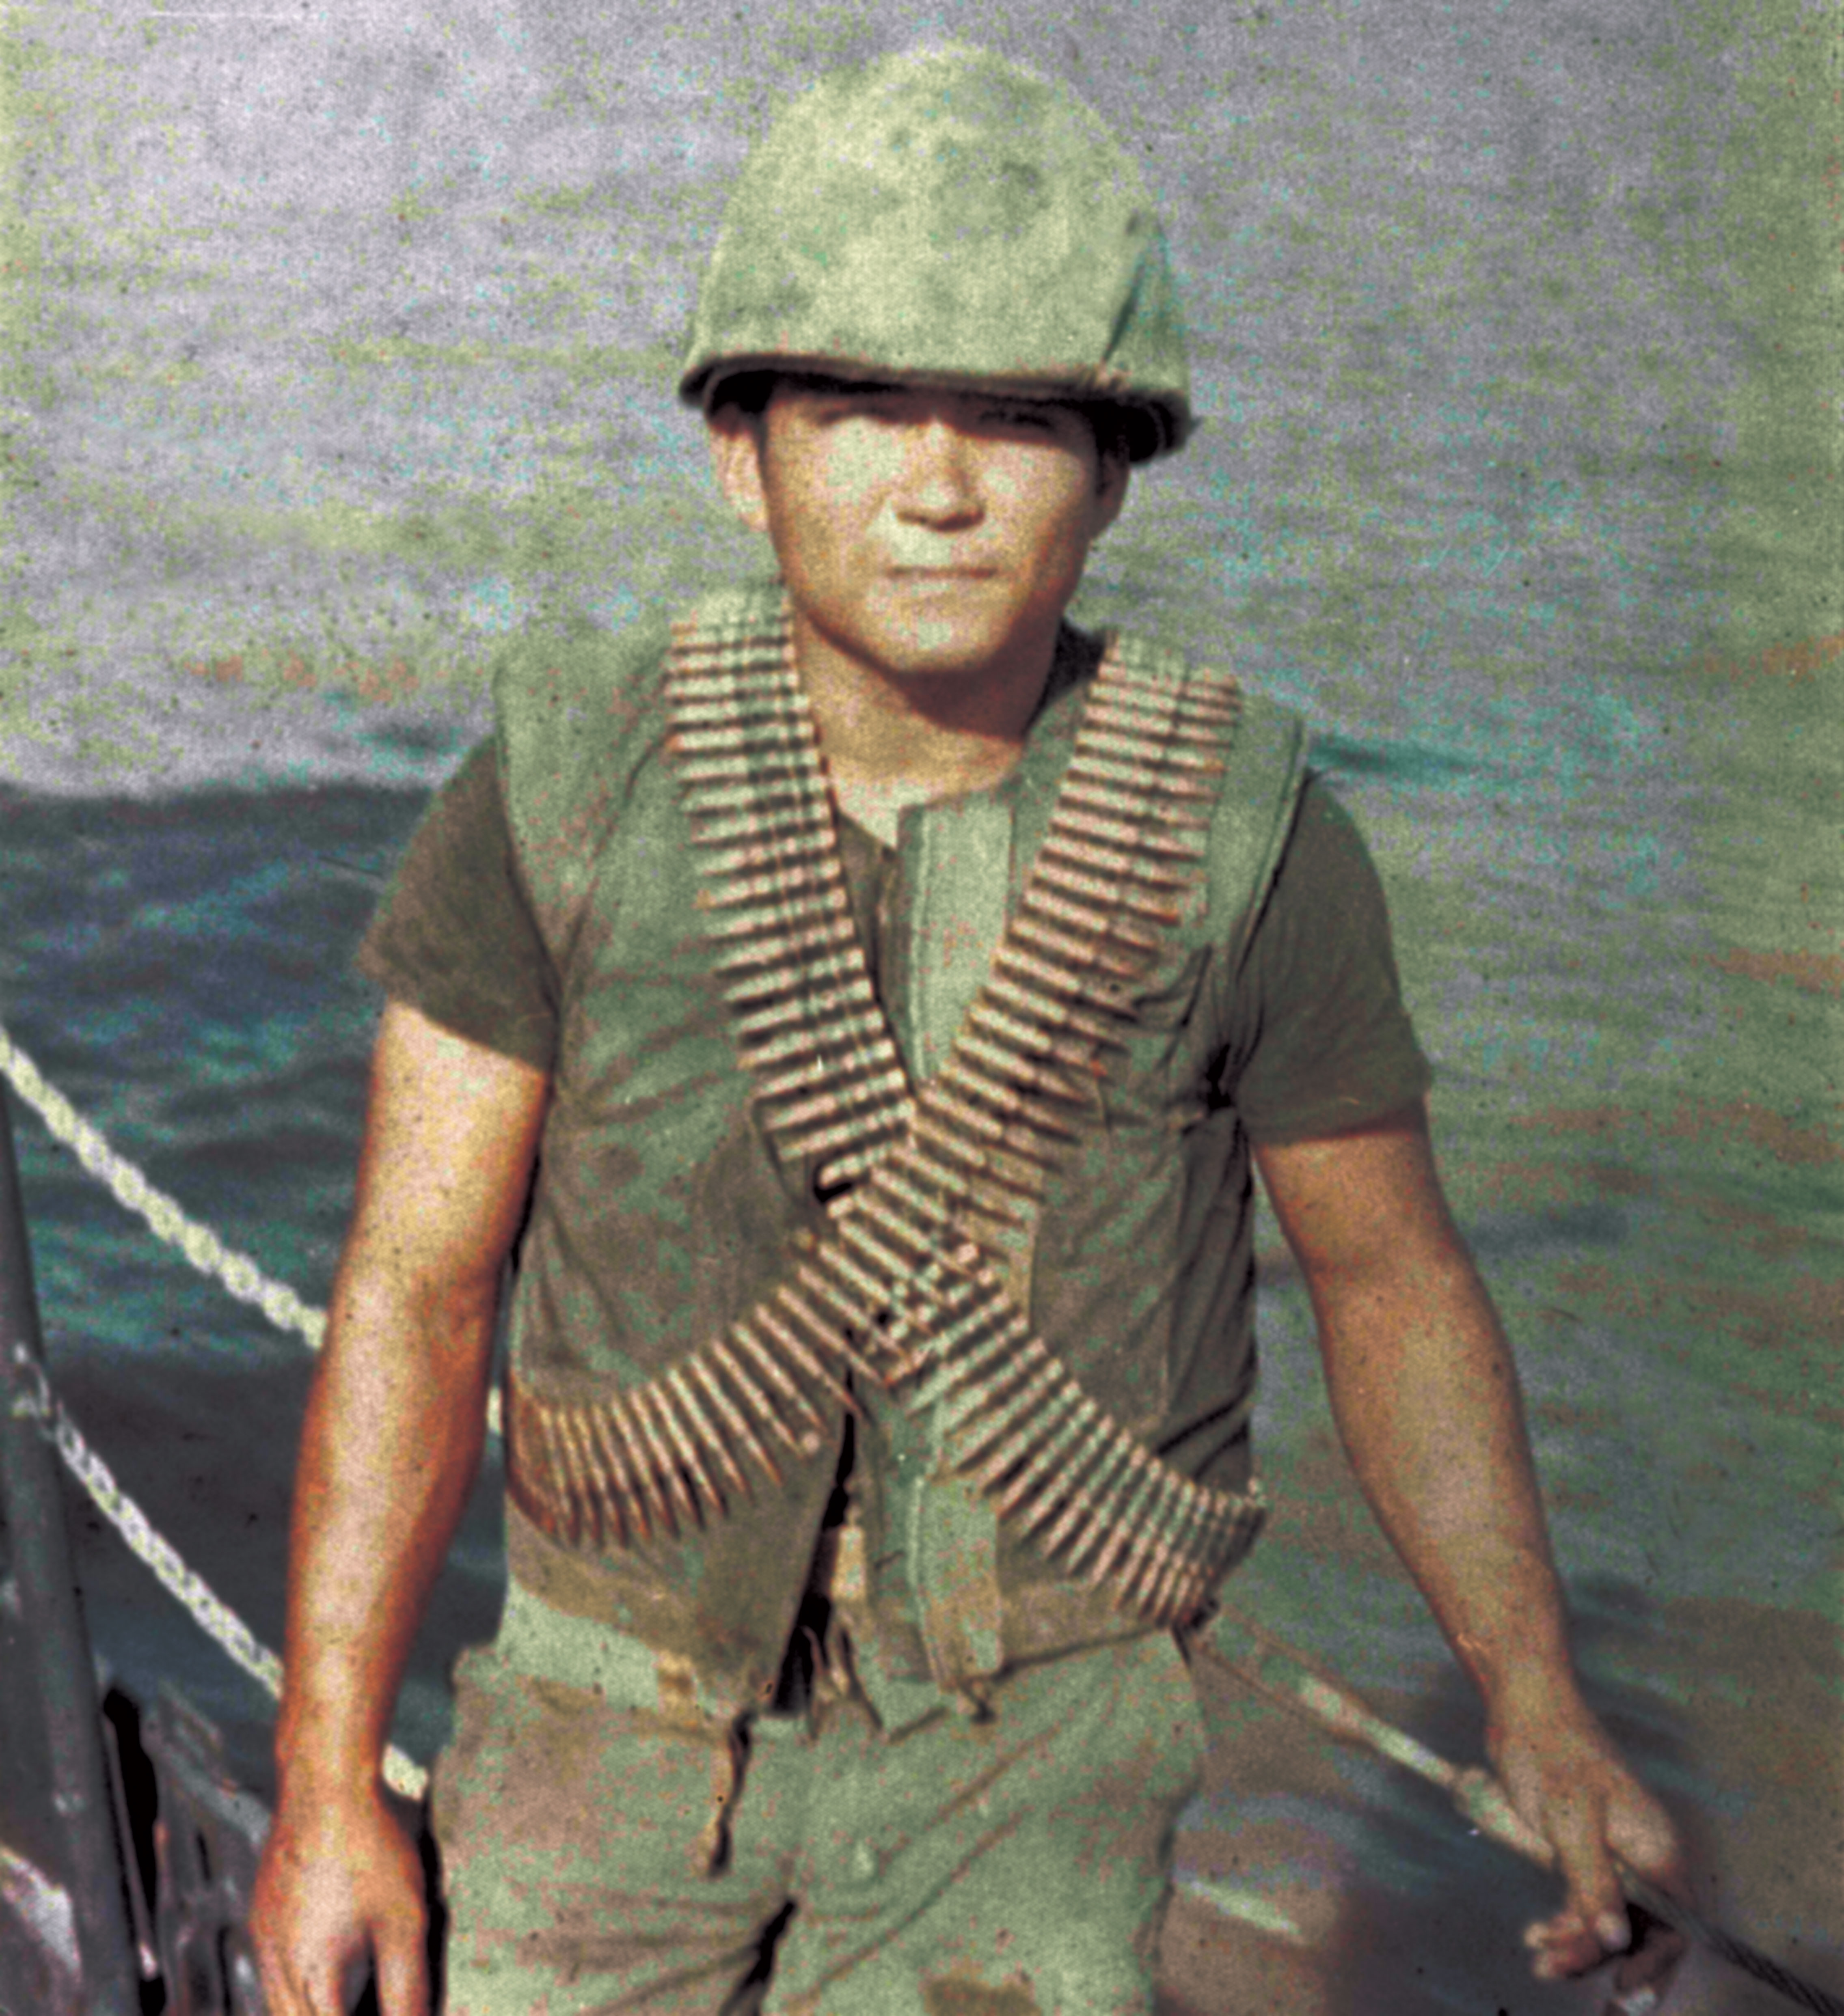 Engineman Heriberto Hernandez in a faded image photographed on the deck of Point Cypress in his typical smallboat patrol attire of battle helmet, flak vest and machine gun bandoliers. (Courtesy of the Hernandez Family)